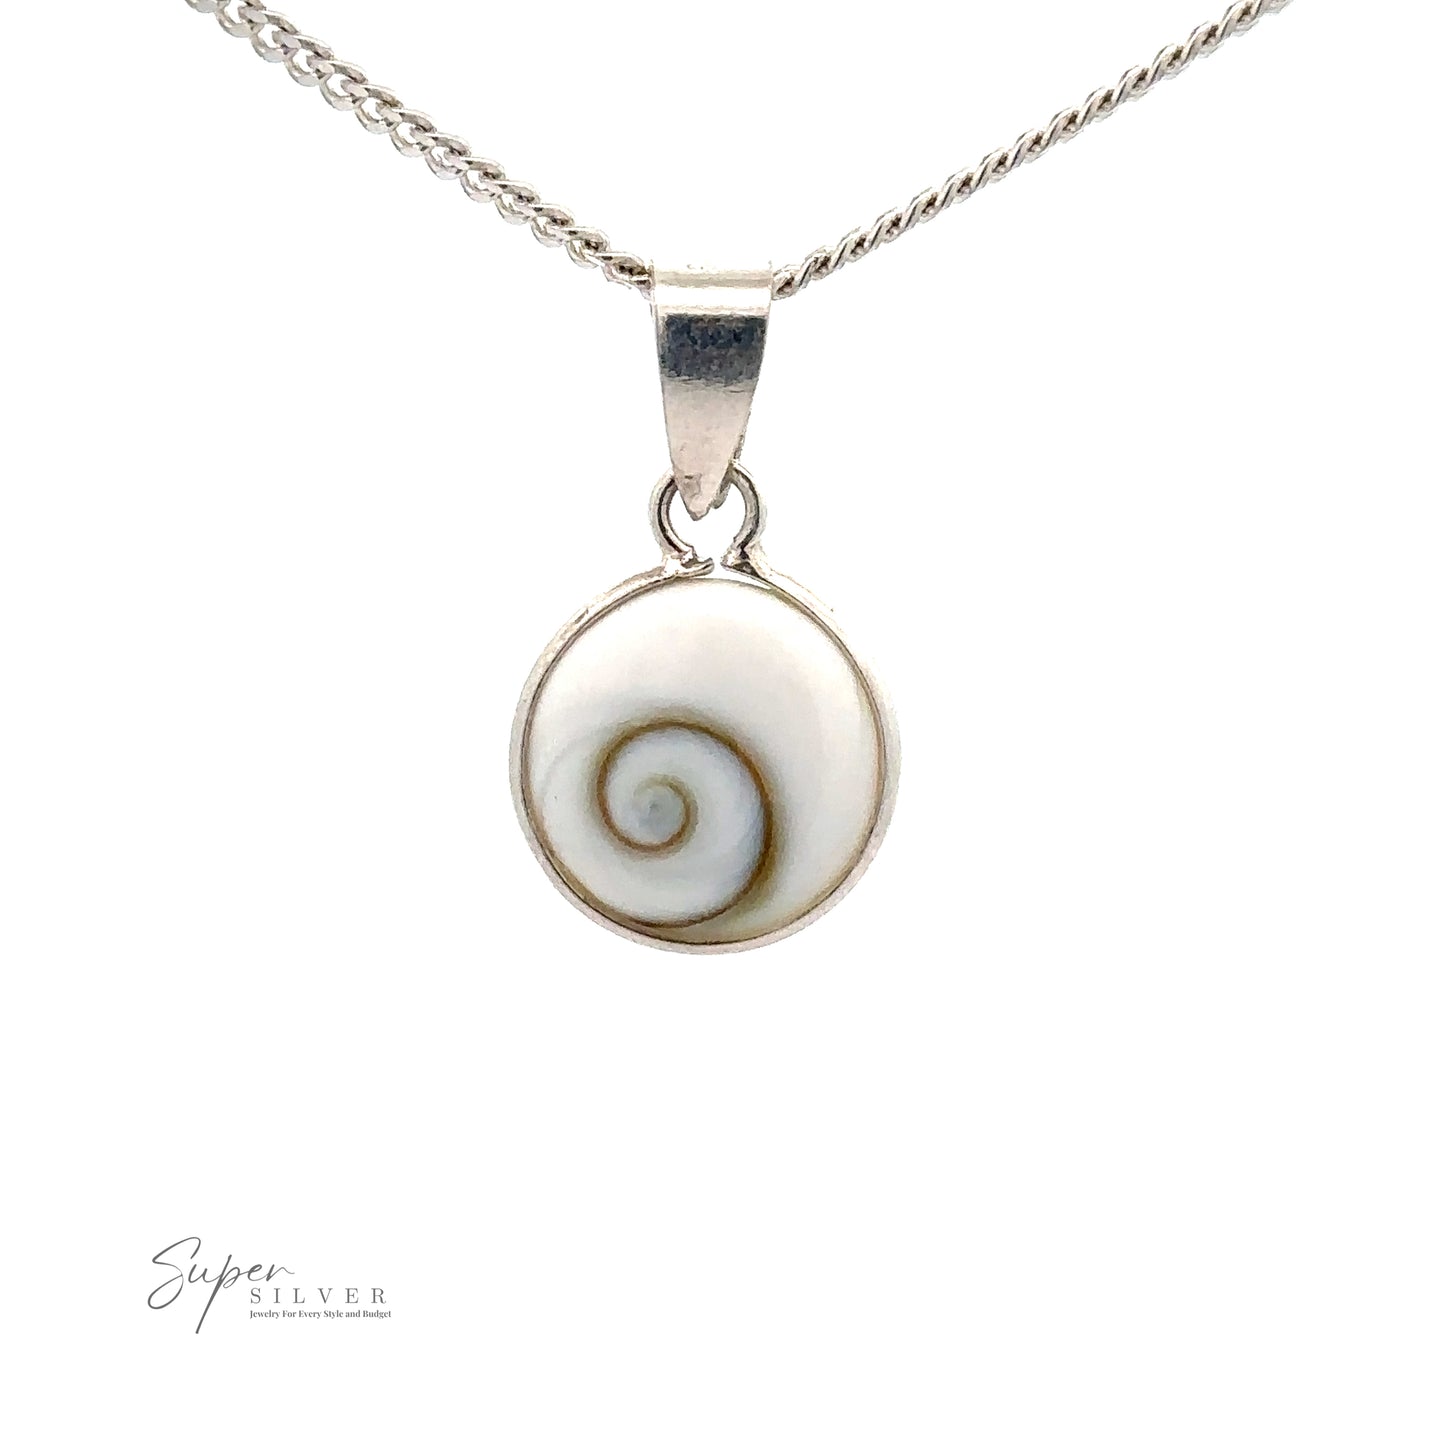 
                  
                    A .925 Sterling Silver necklace with a Small Round Shiva Shell Pendant featuring a spiral design on a white background. The "Super Silver" logo is in the bottom left corner, adding coastal elegance to the piece.
                  
                